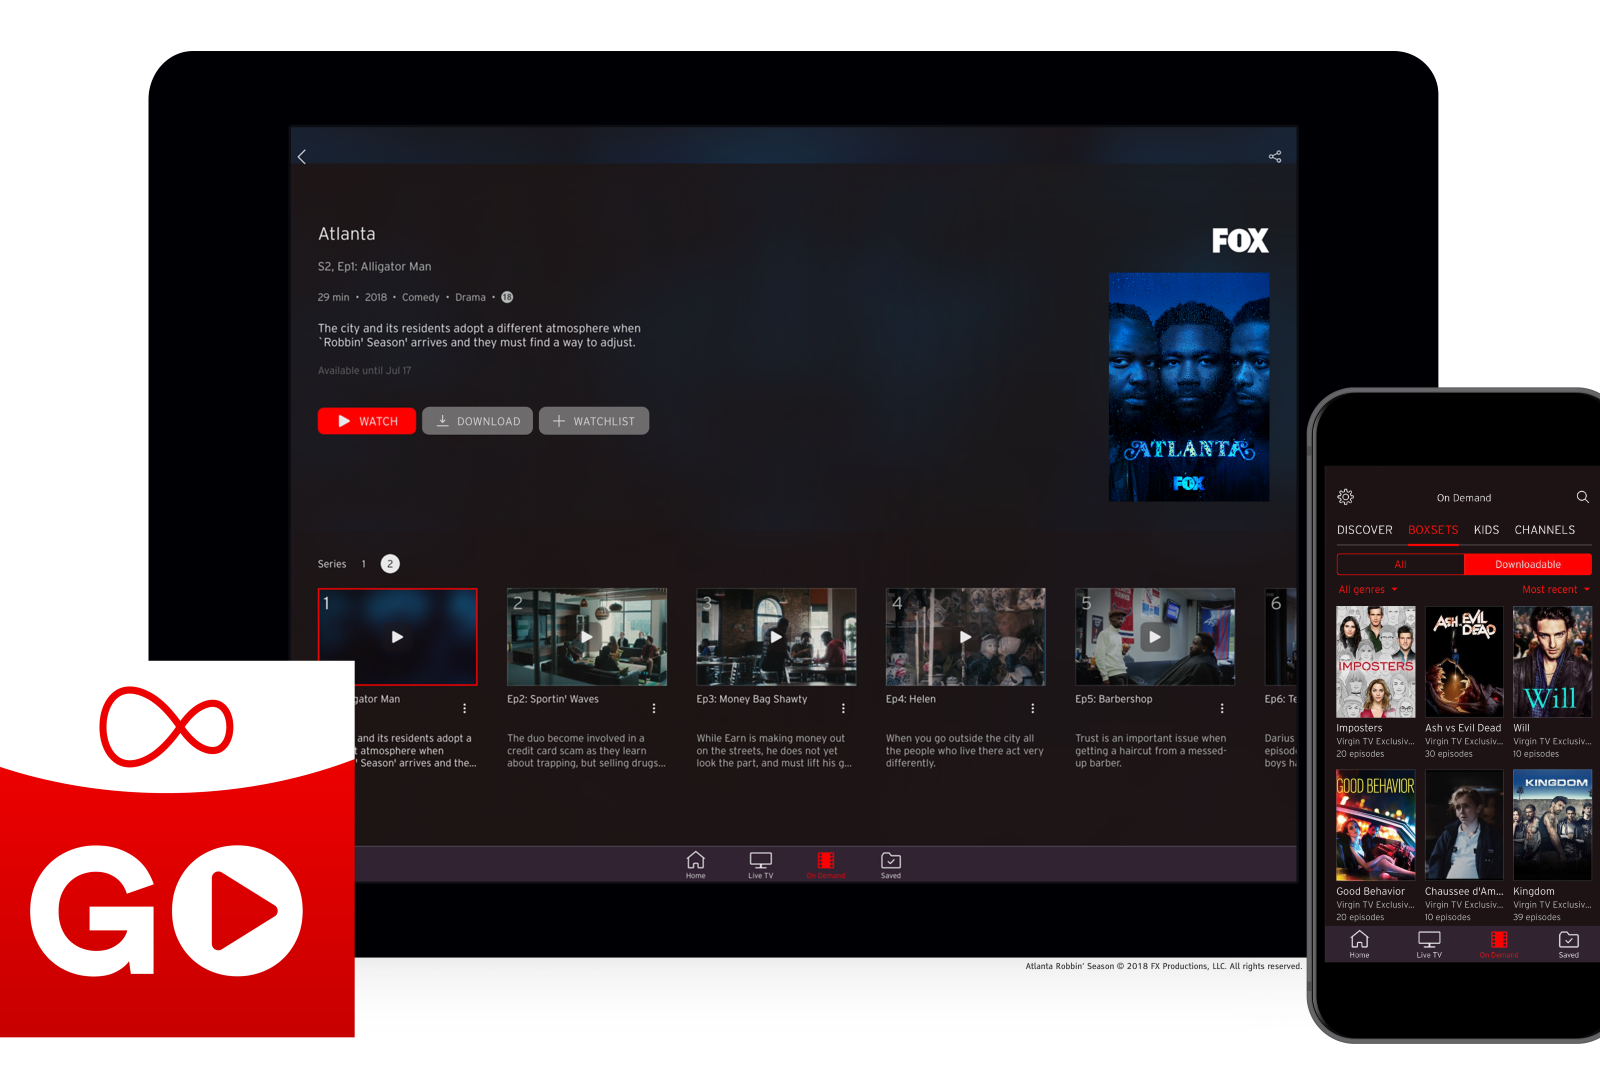 You can now download Virgin Media shows to your phone or tablet image 1